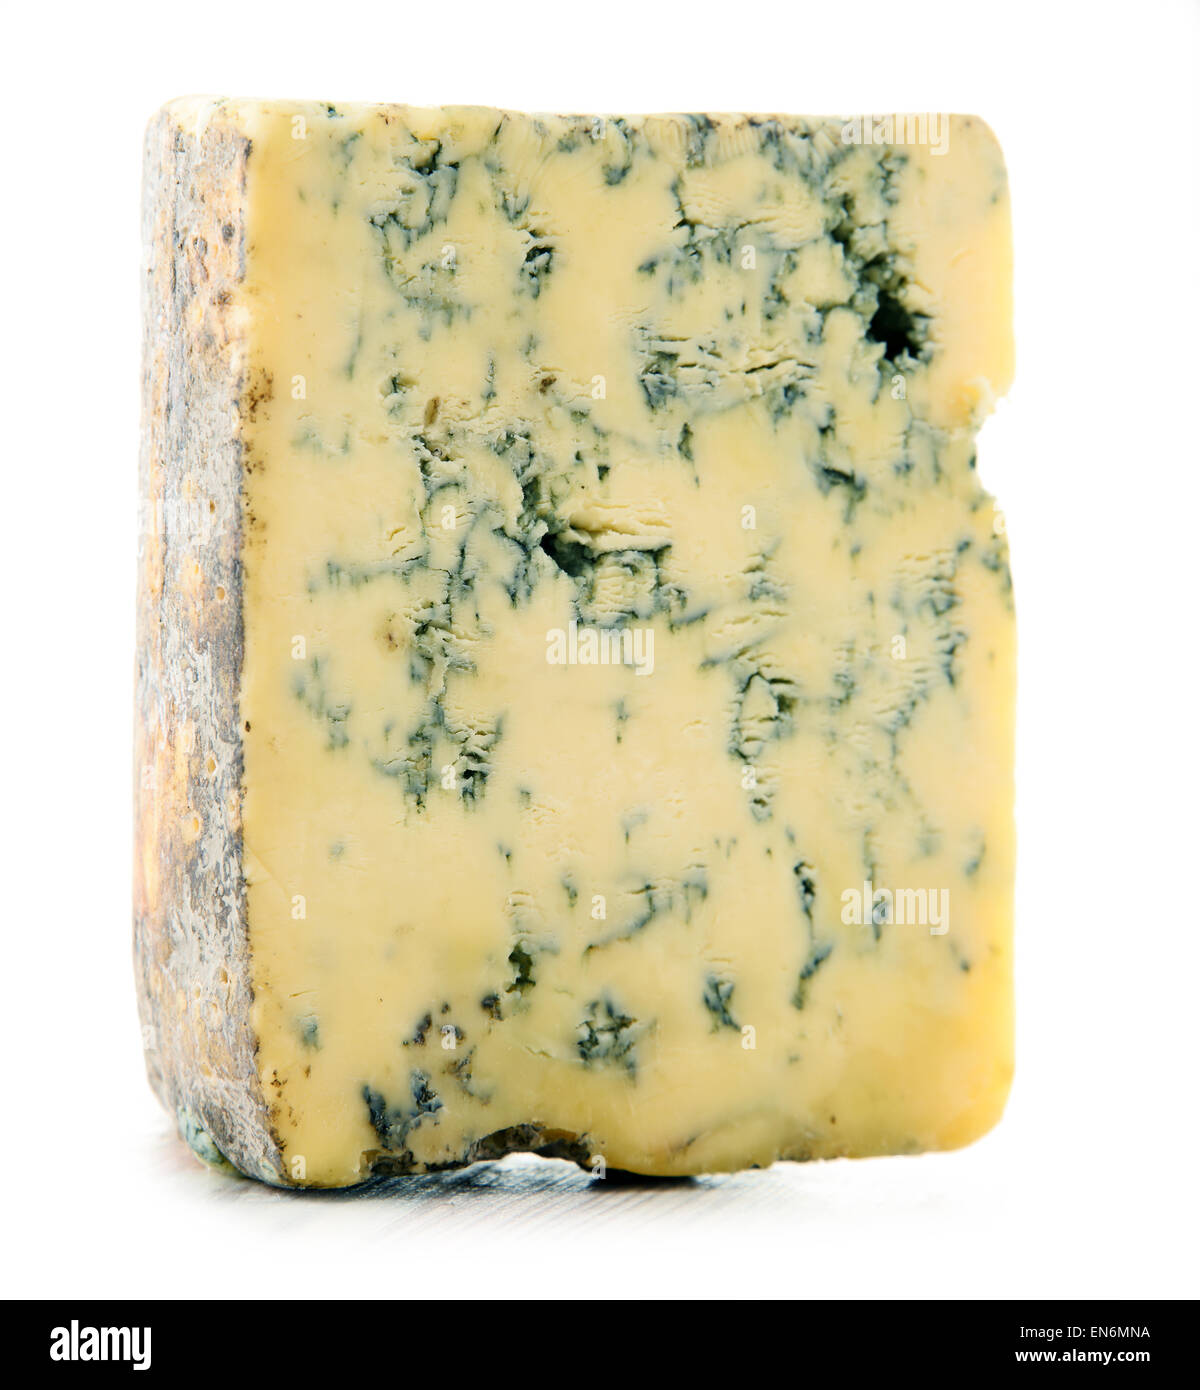 Piece of blue cheese isolated on white background Stock Photo